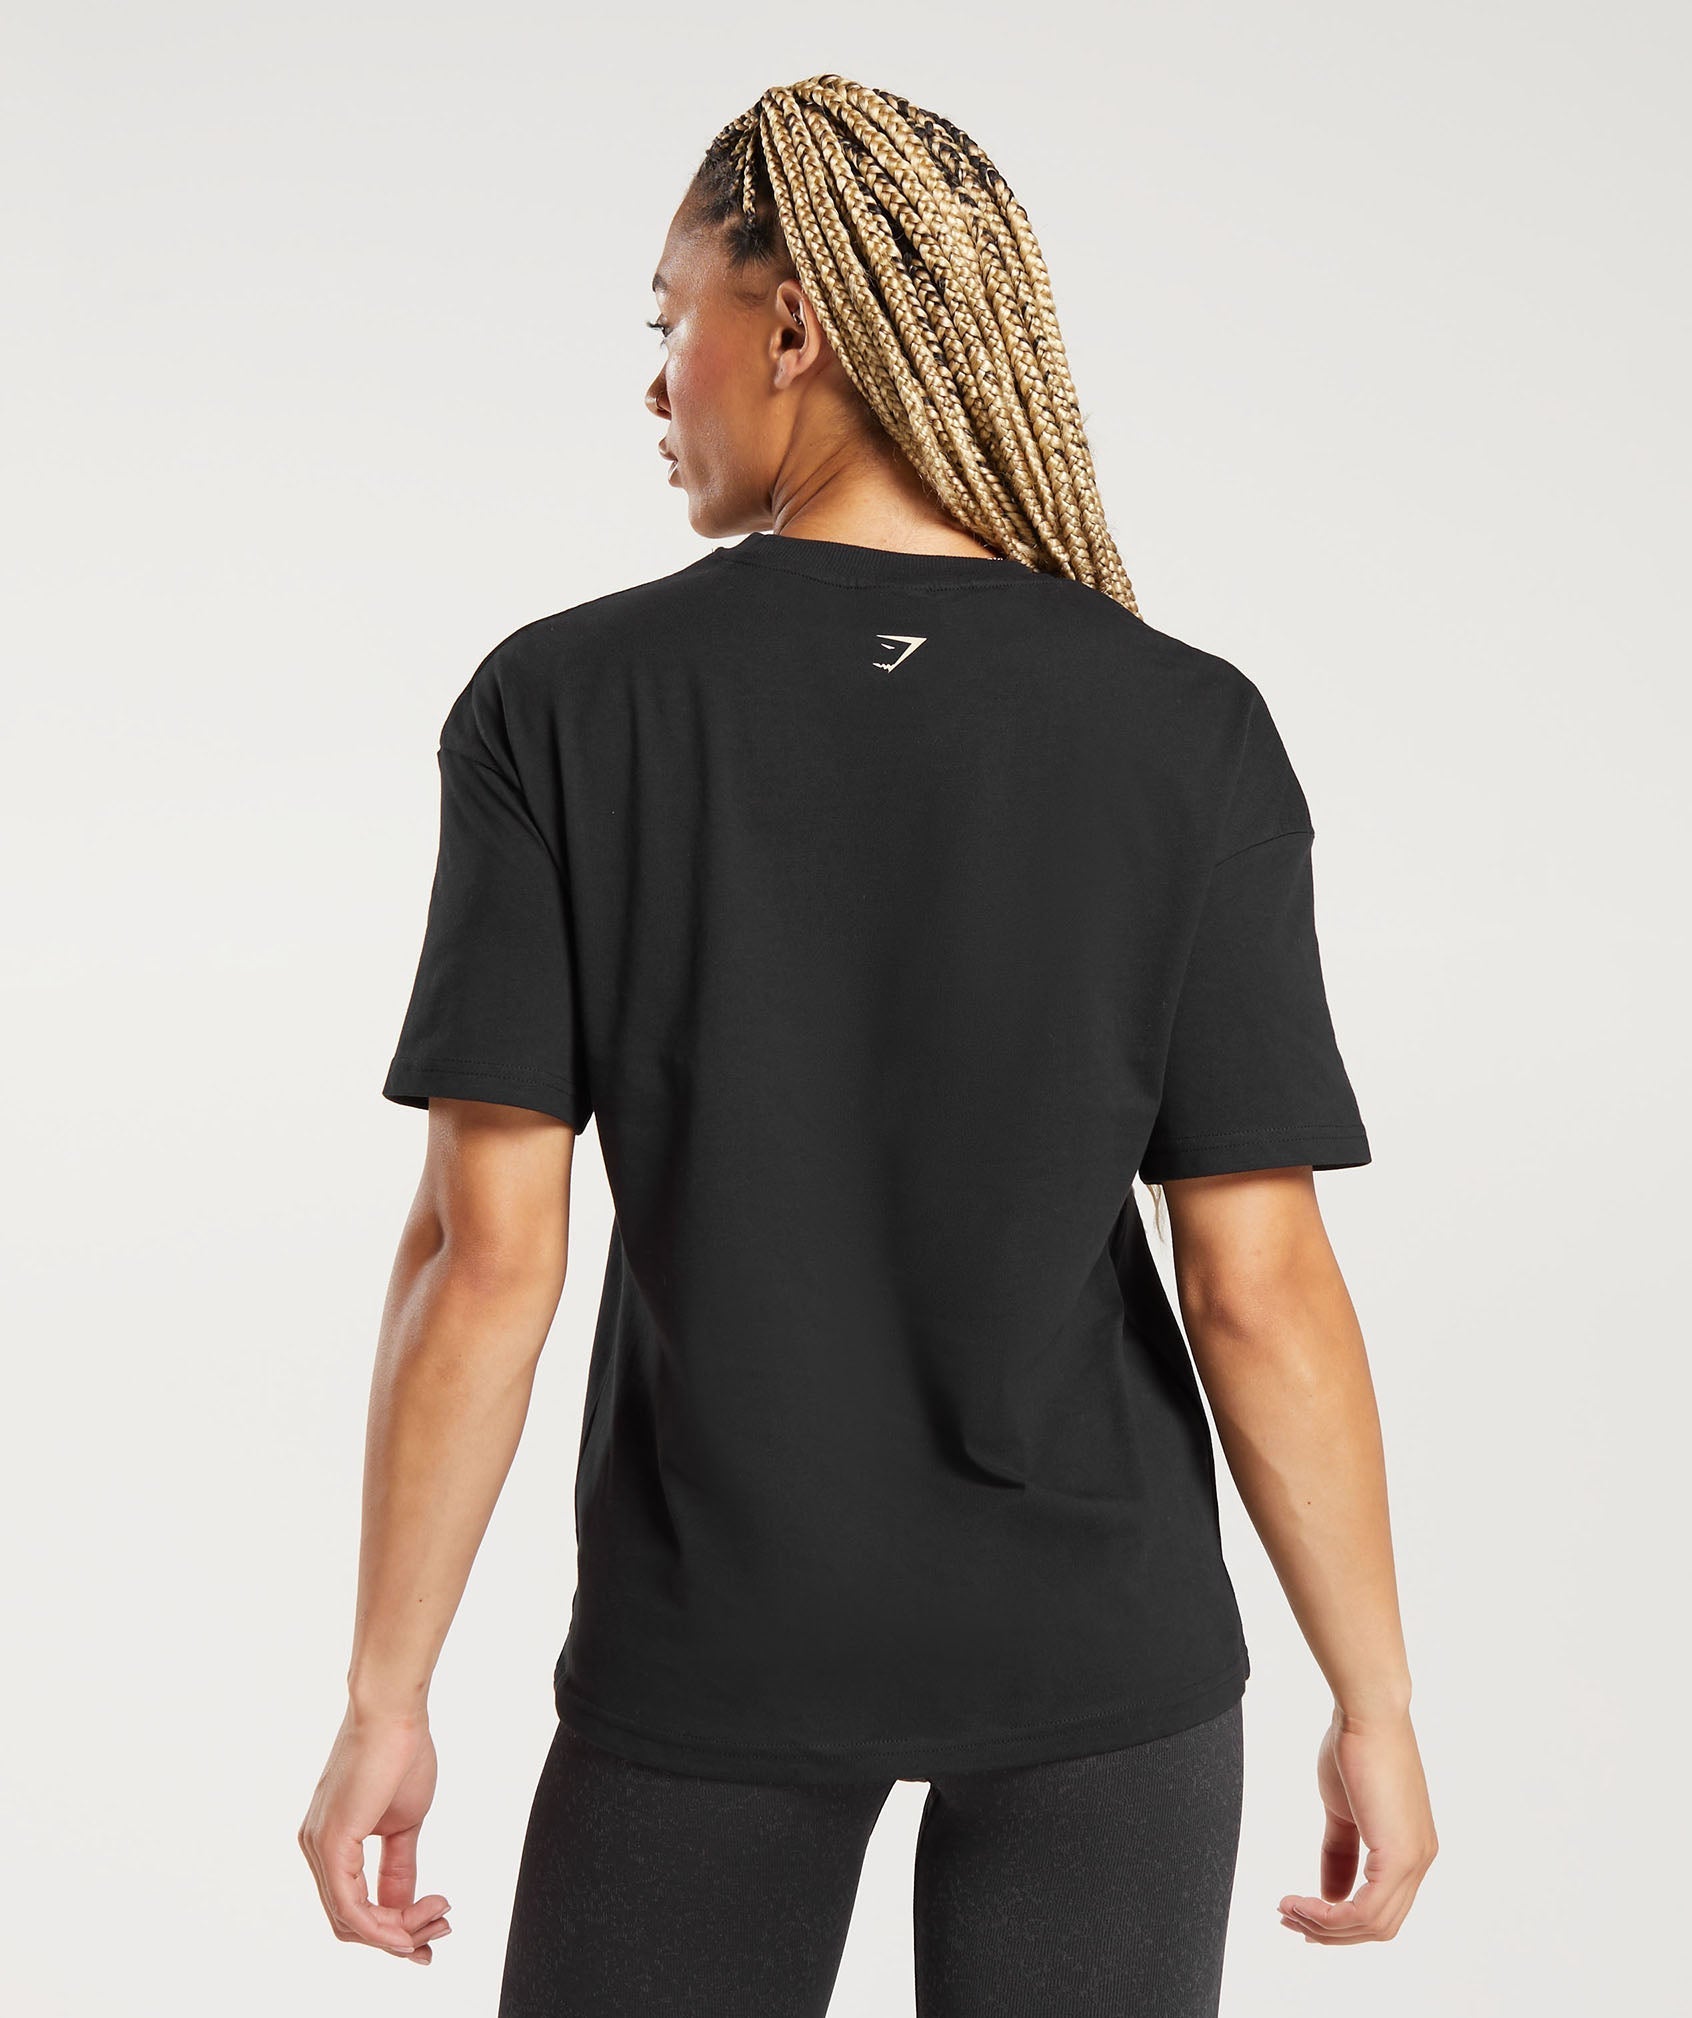 Committed To The Craft T-Shirt in Black - view 2